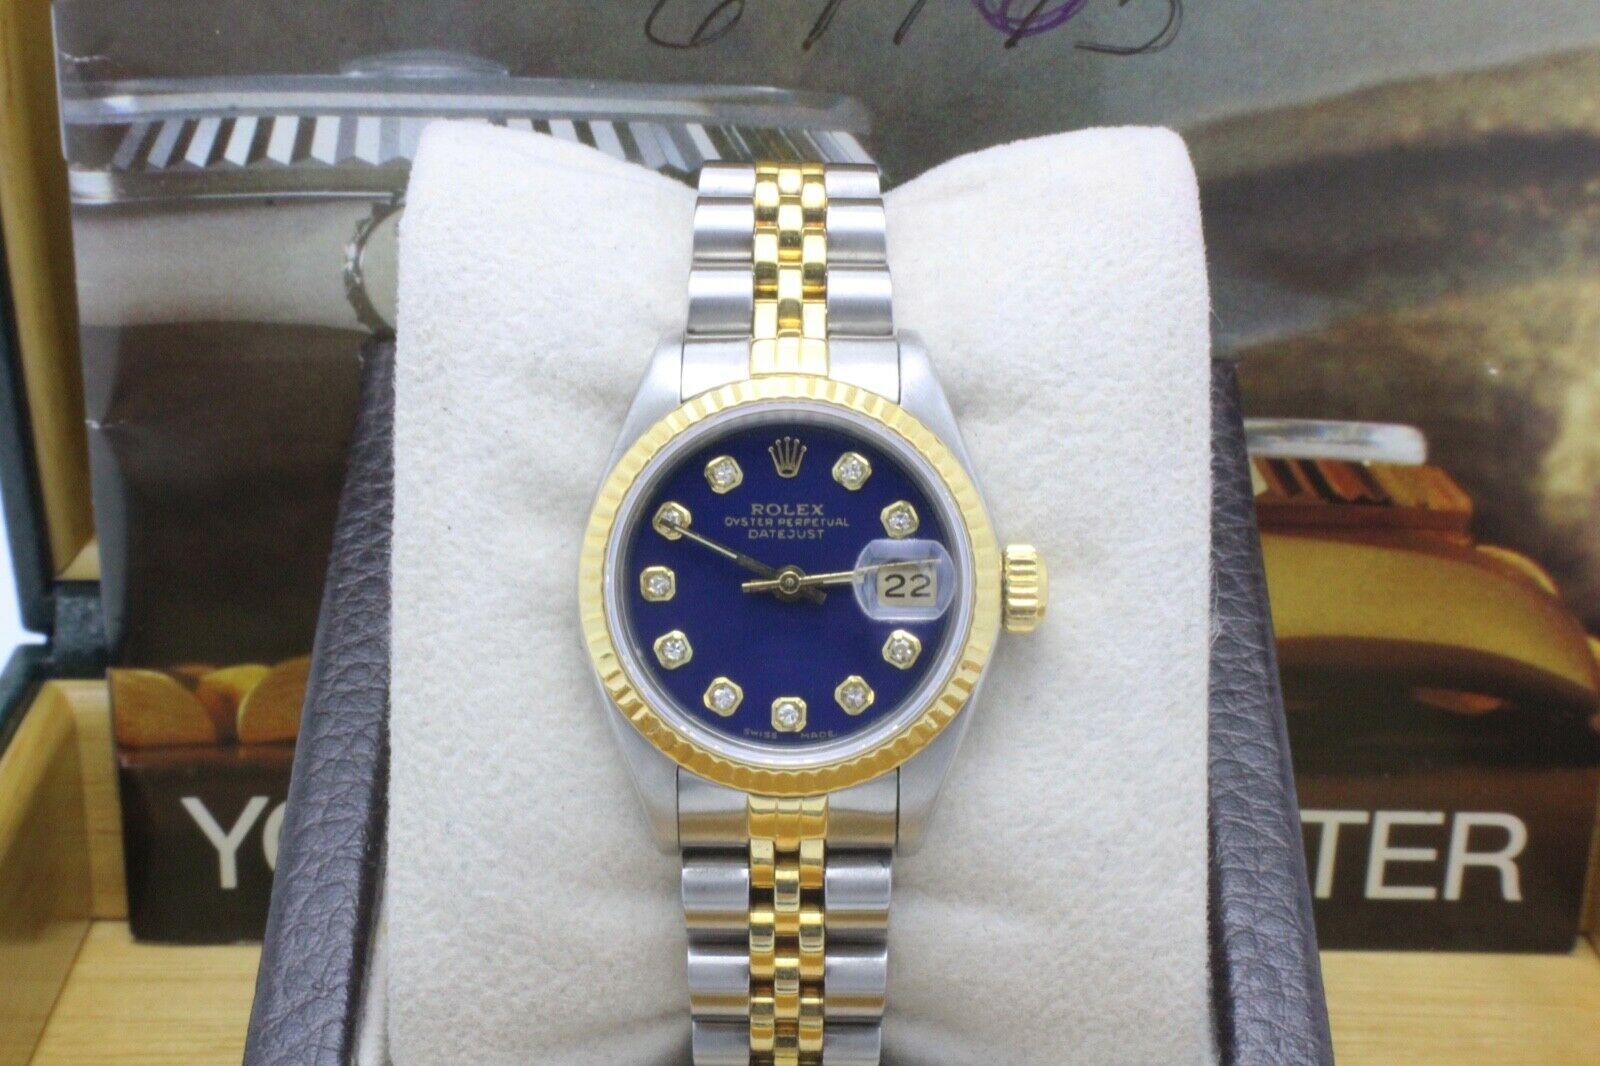 Style Number: 69163

 

Serial: 863****

 

Model: Datejust

 

Case: Stainless Steel

 

Band: 18K Yellow Gold & Stainless Steel

 

Bezel: 18K Yellow Gold Fluted Bezel

 

Dial: Custom Diamond Dial

 

Face: Sapphire Crystal

 

Case Size: 26mm

